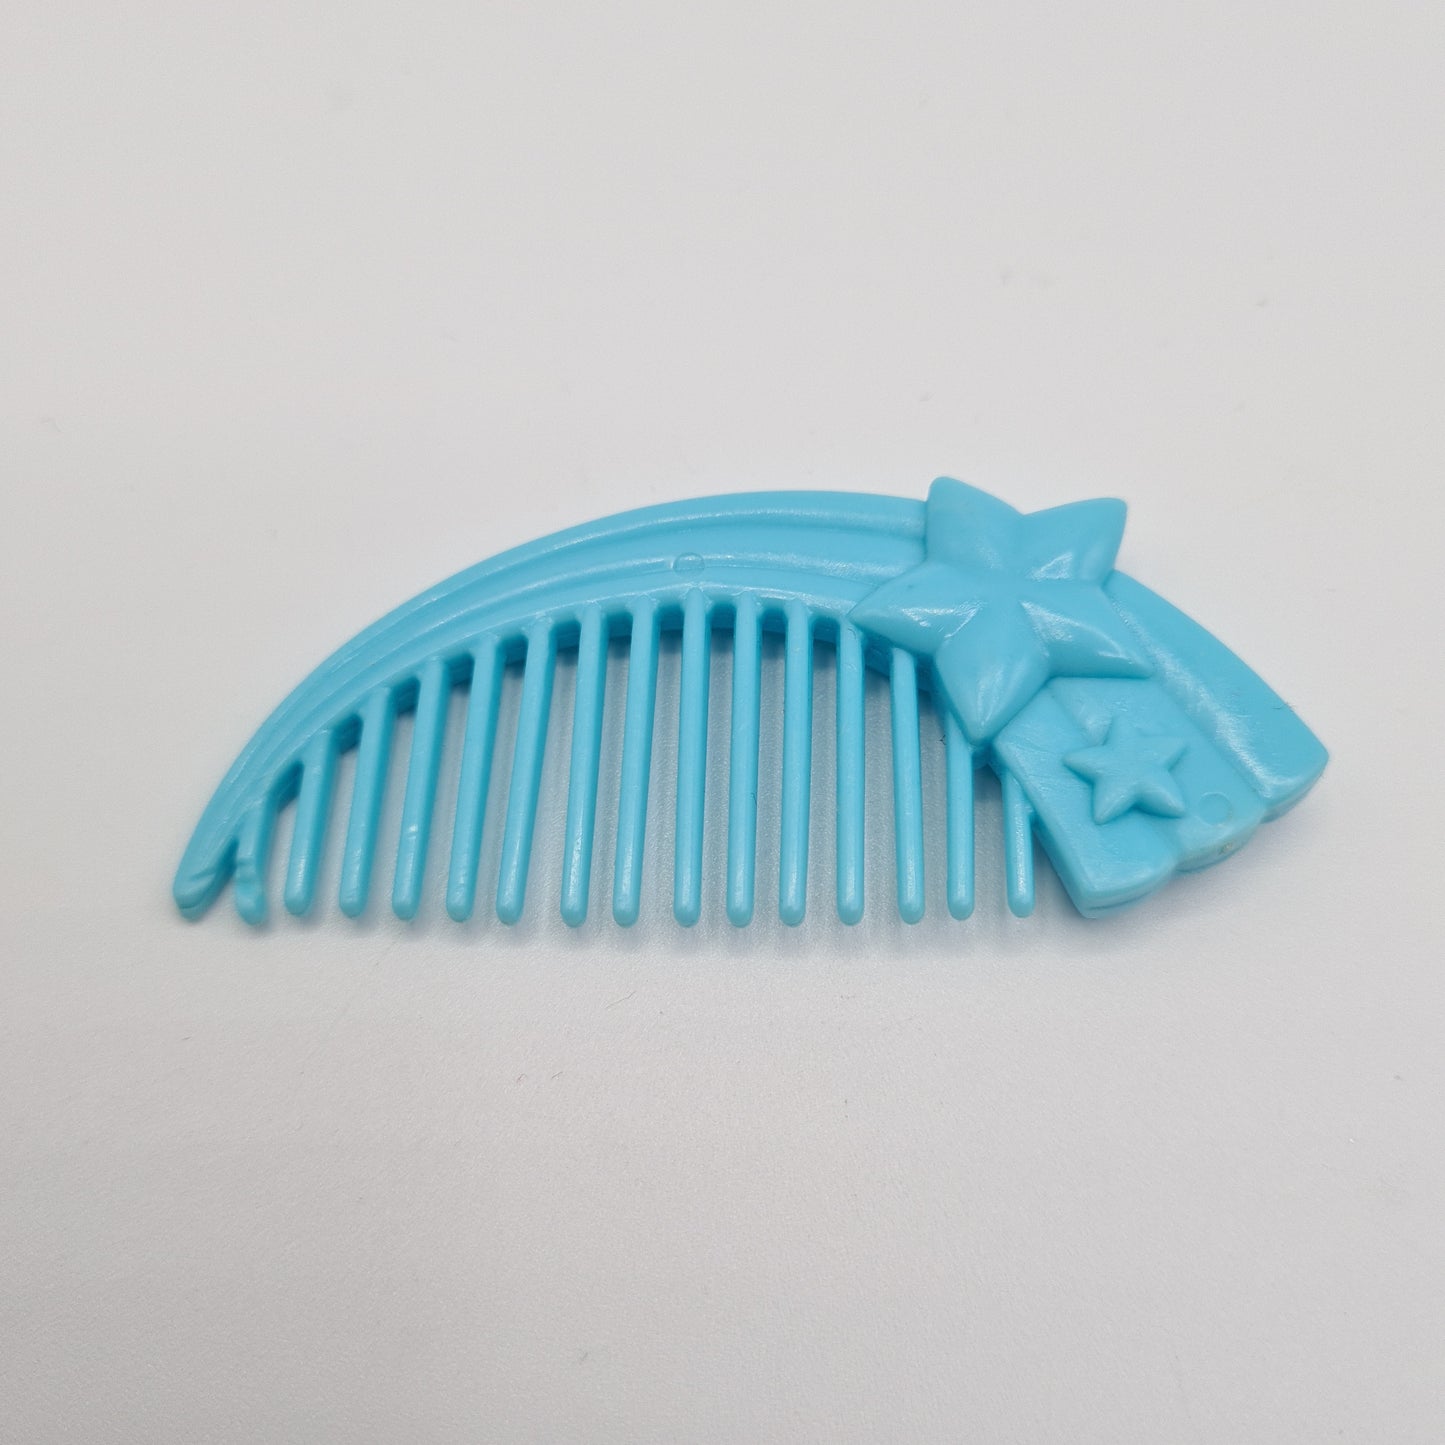 My Little Pony (G1) - Blue Shooting Star Comb W13